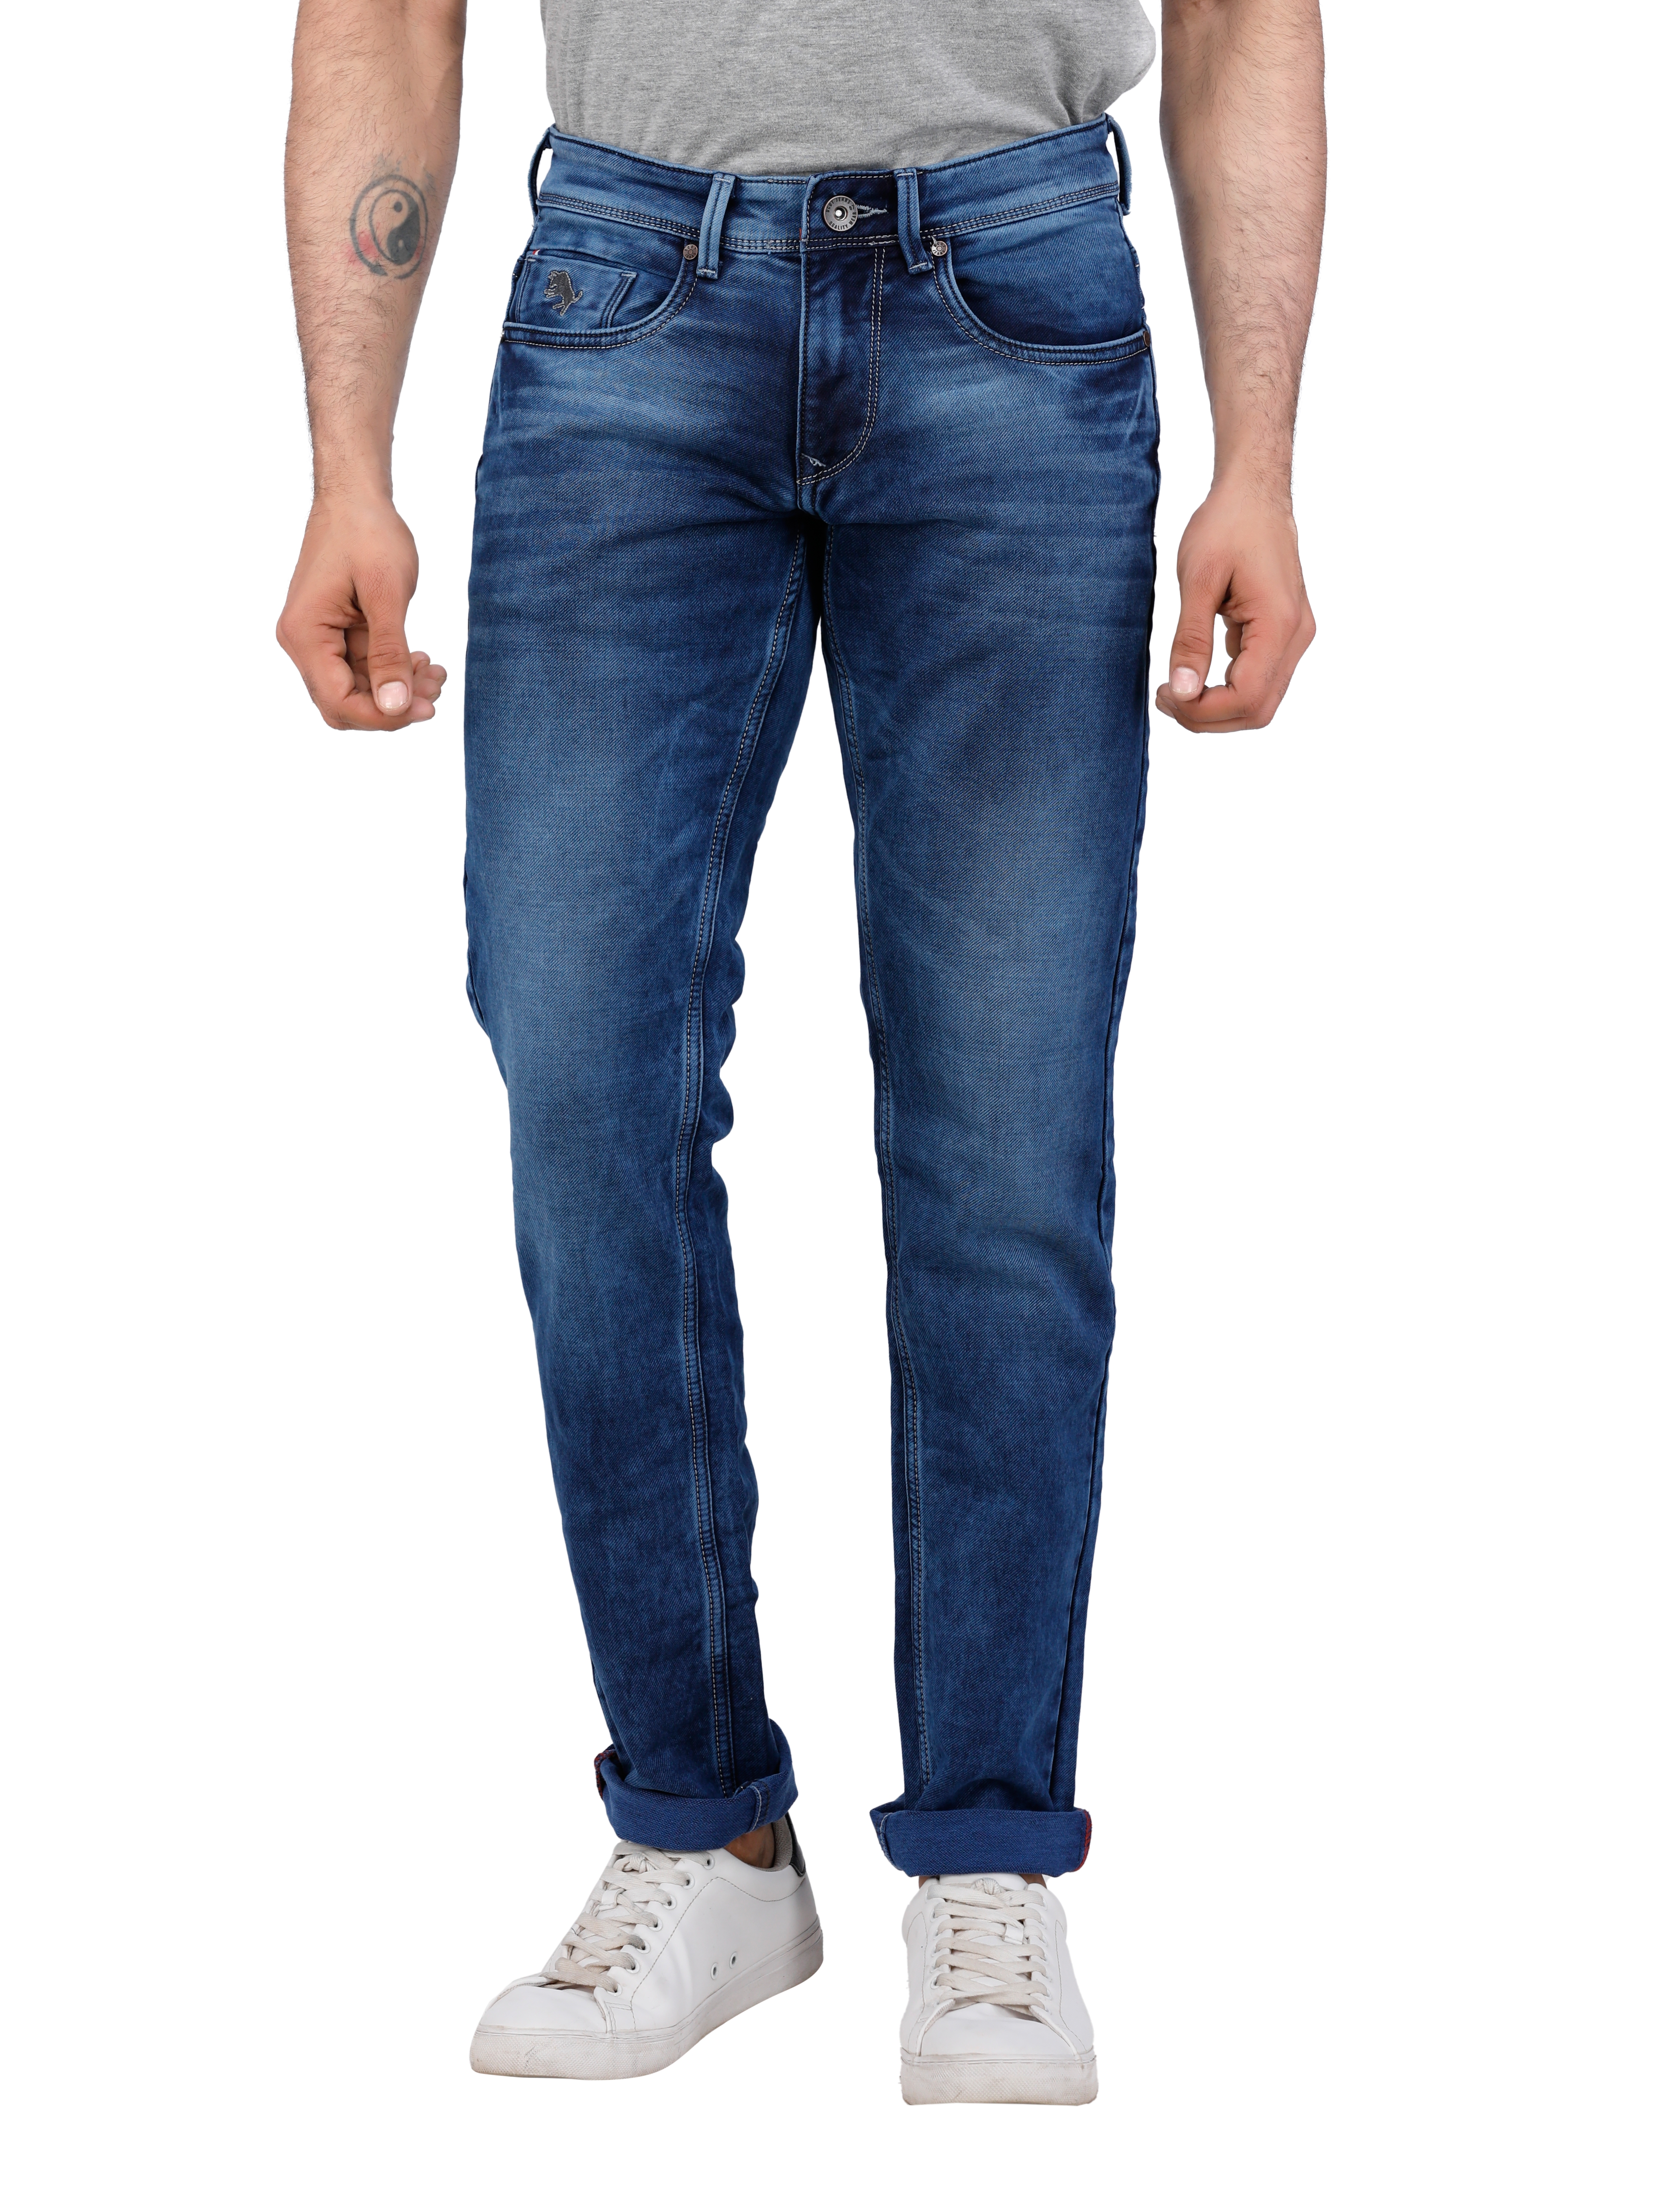 D'cot by Donear | D'cot by Donear Men Blue Cotton Skinny Solid Jeans 0